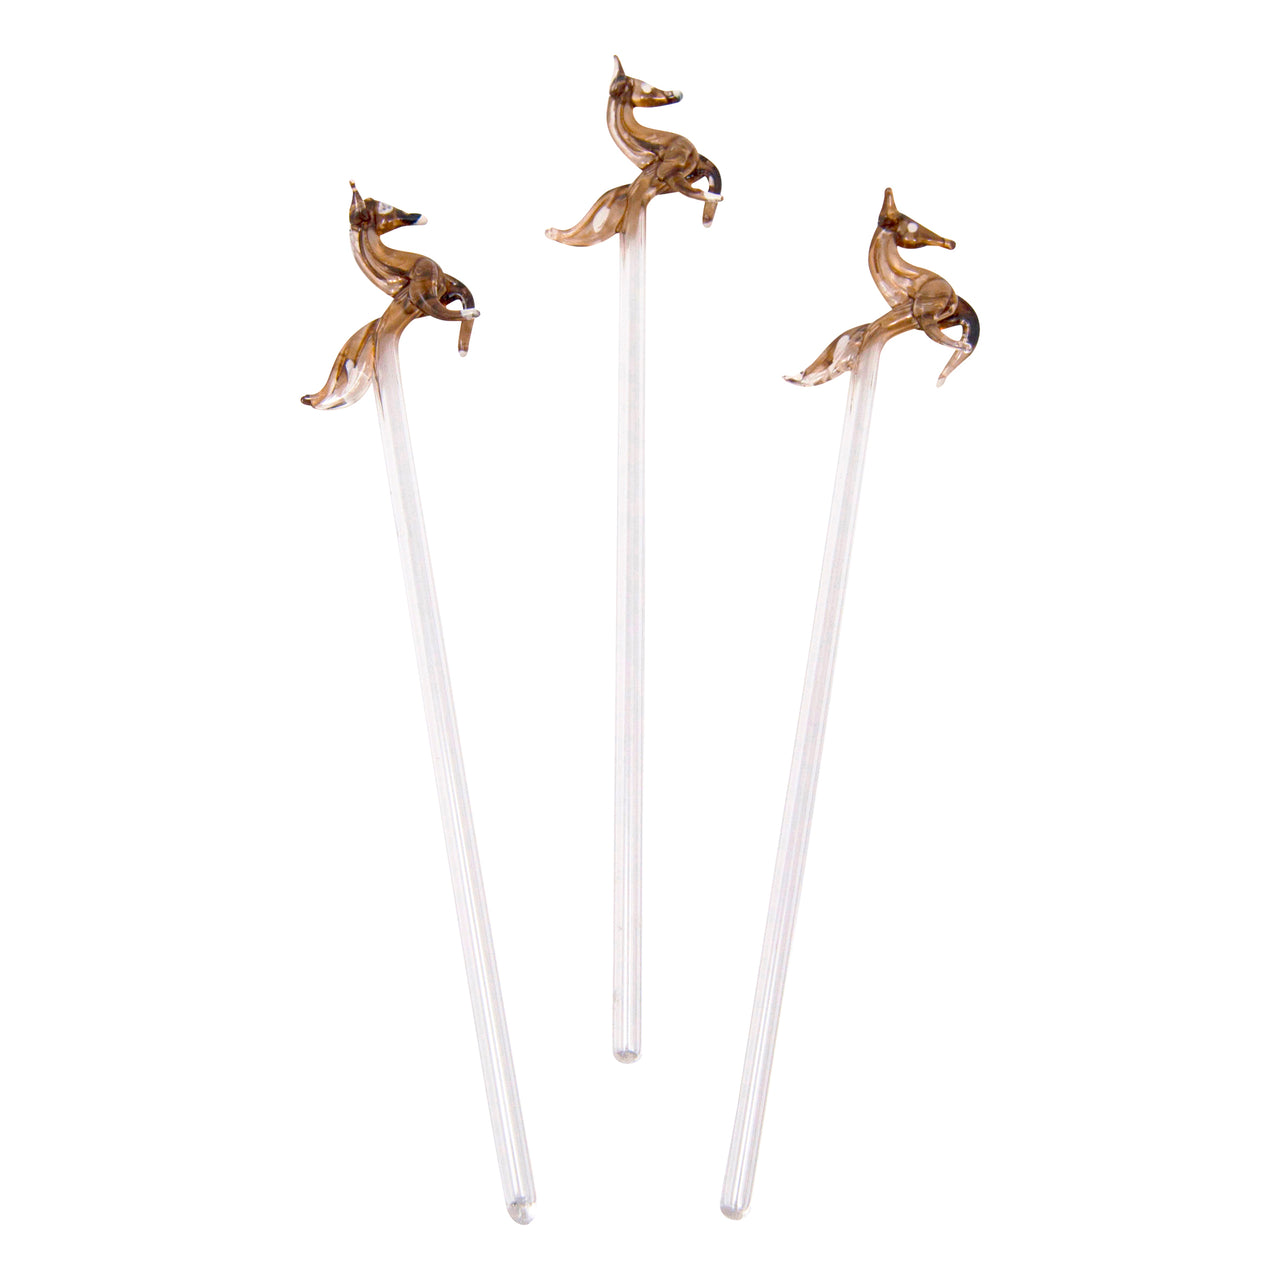 Vintage Horse Hand Blown Glass Stirrers | The Hour Shop